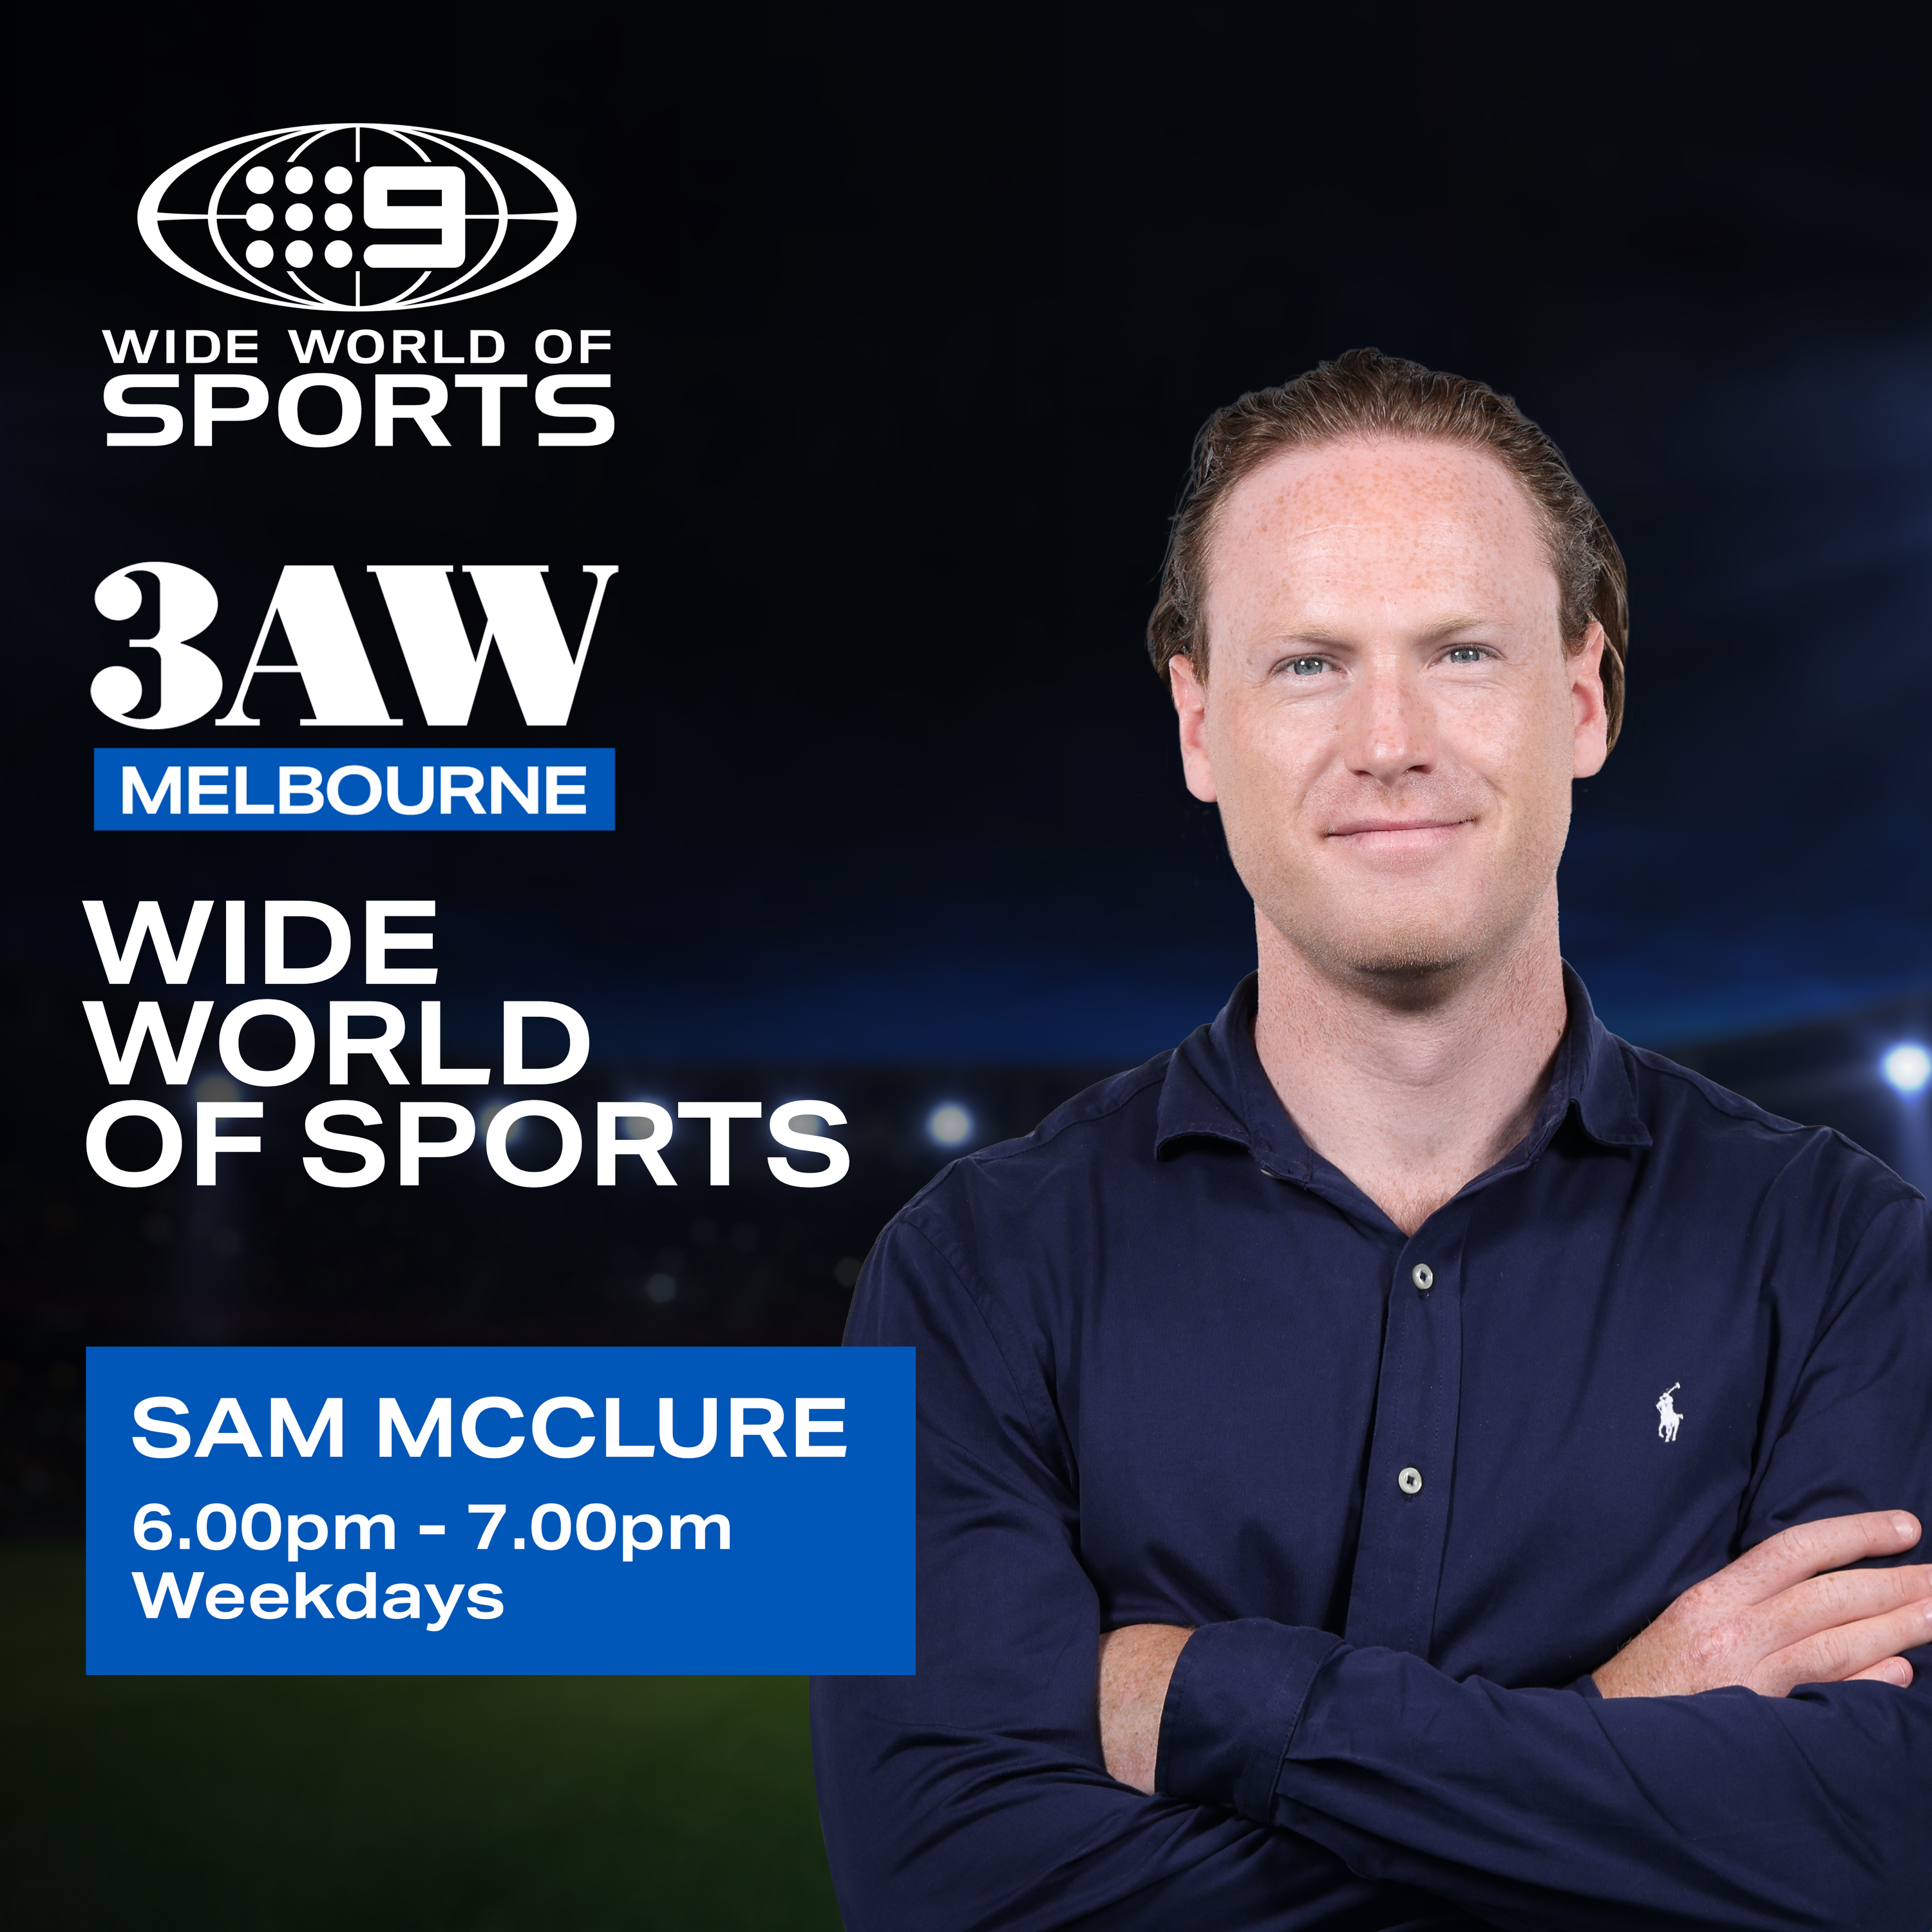 Sam McClure has a question for you about the Australian Cricket team